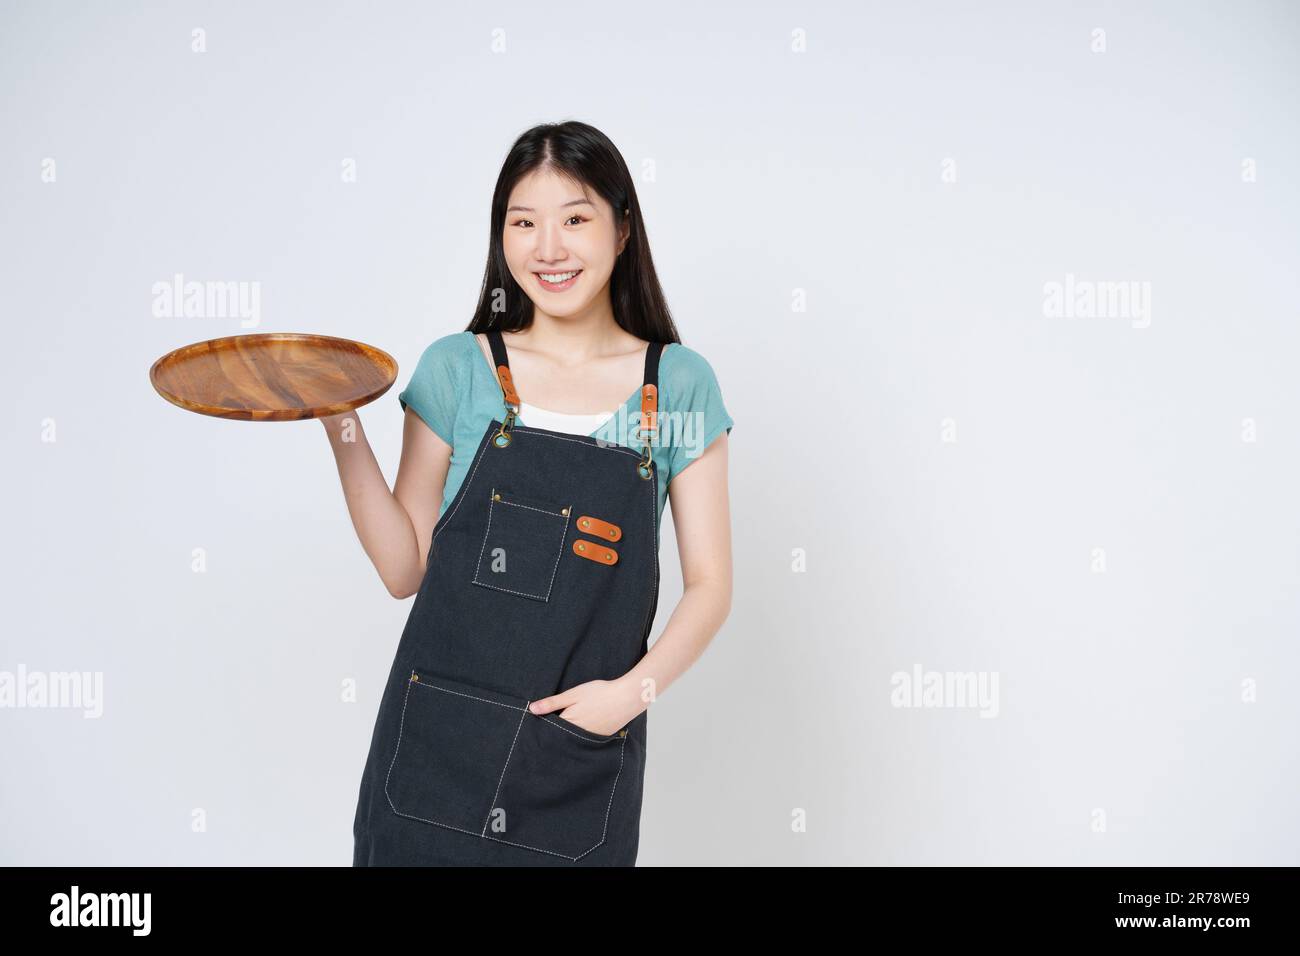 Young woman wearing apron and holding empty plate isolated on white background. Stock Photo